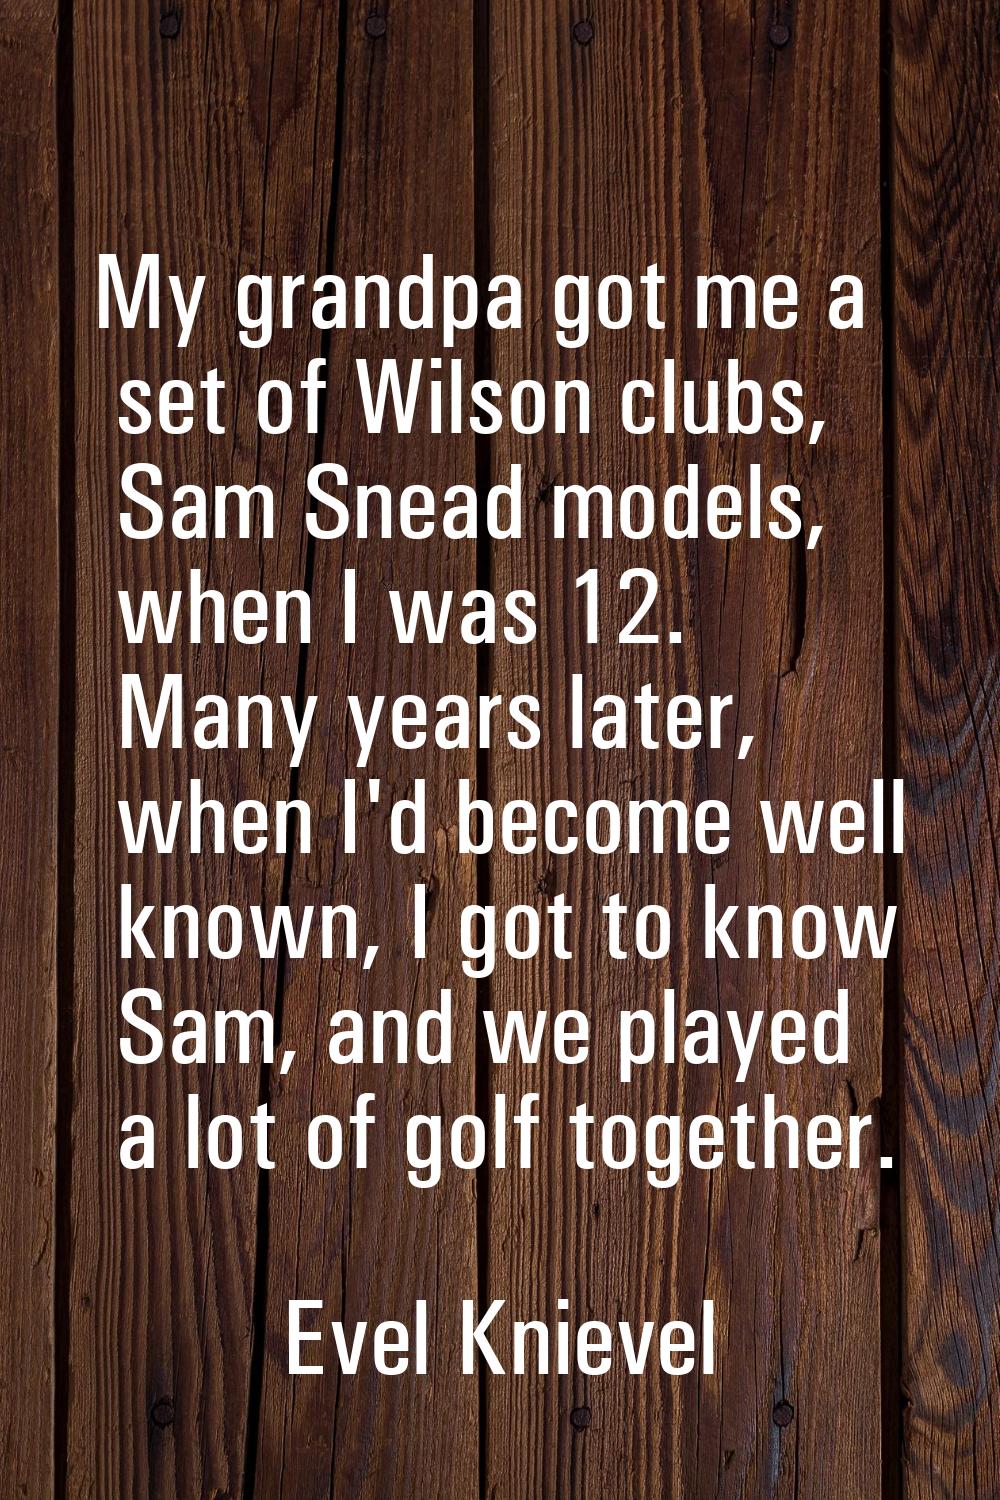 My grandpa got me a set of Wilson clubs, Sam Snead models, when I was 12. Many years later, when I'